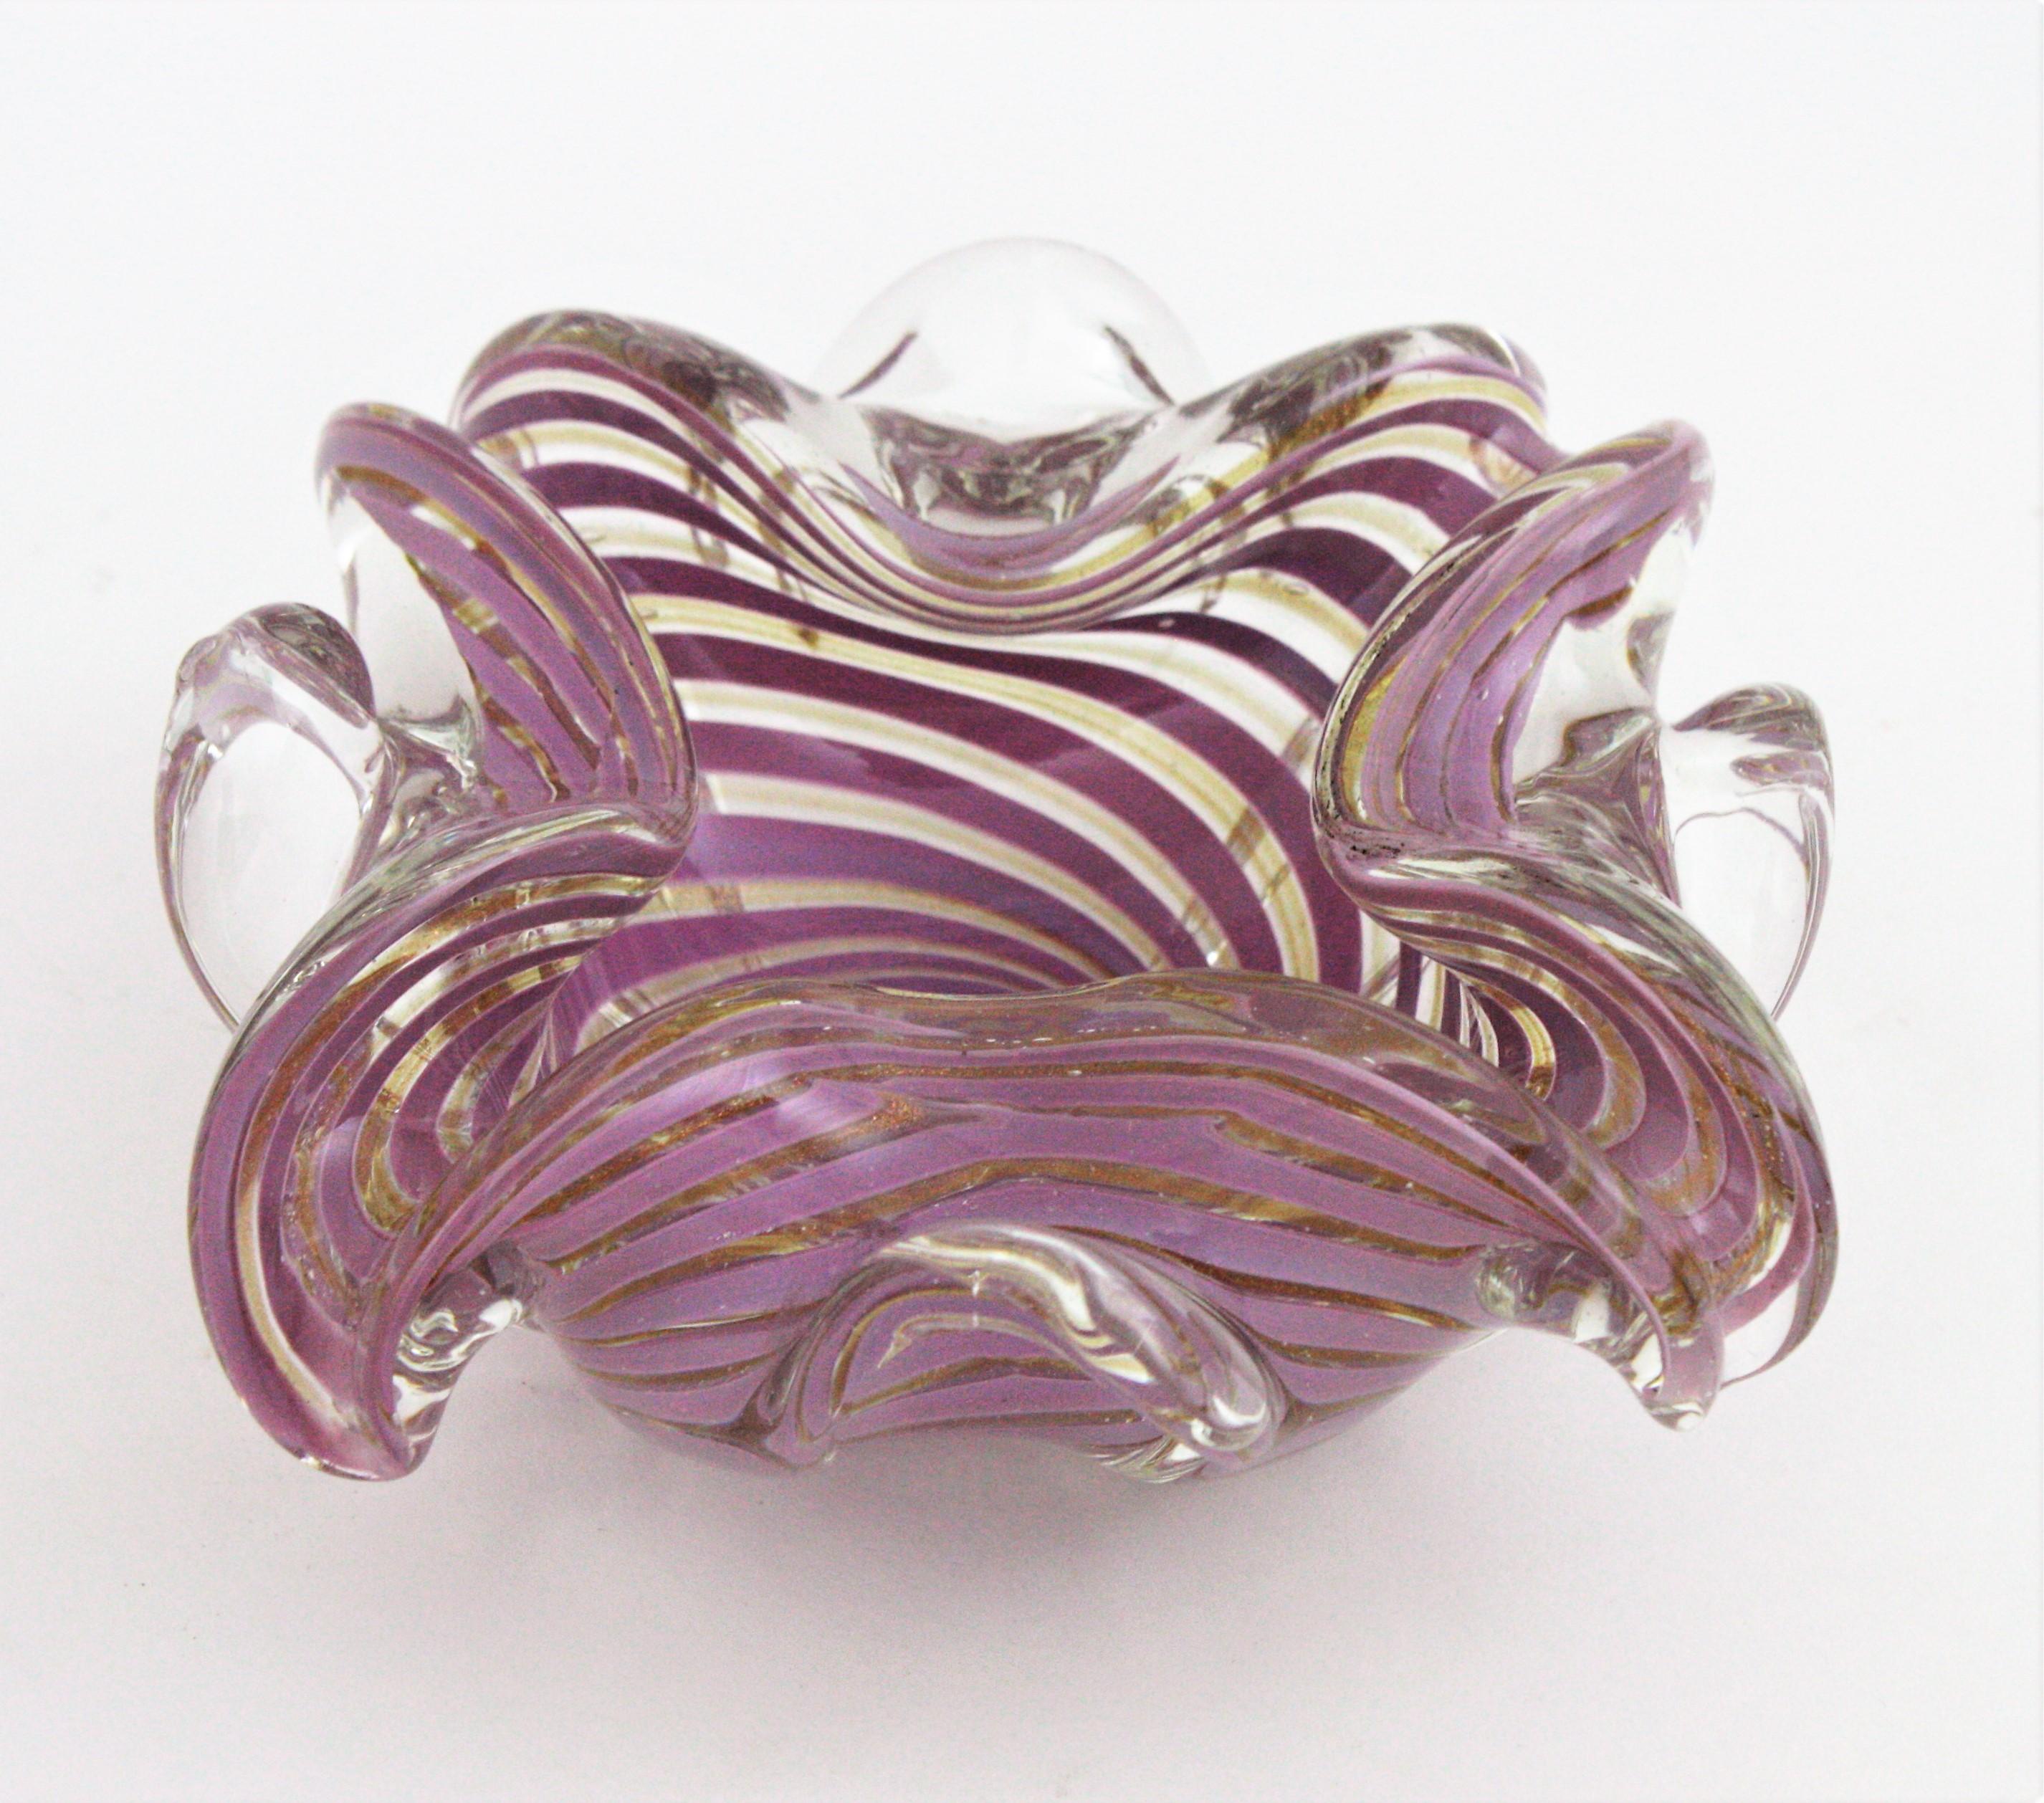 Fratelli Toso Murano Glass Lilac Swirl Ribbons & Gold Dust Large Bowl / Ashtray For Sale 6